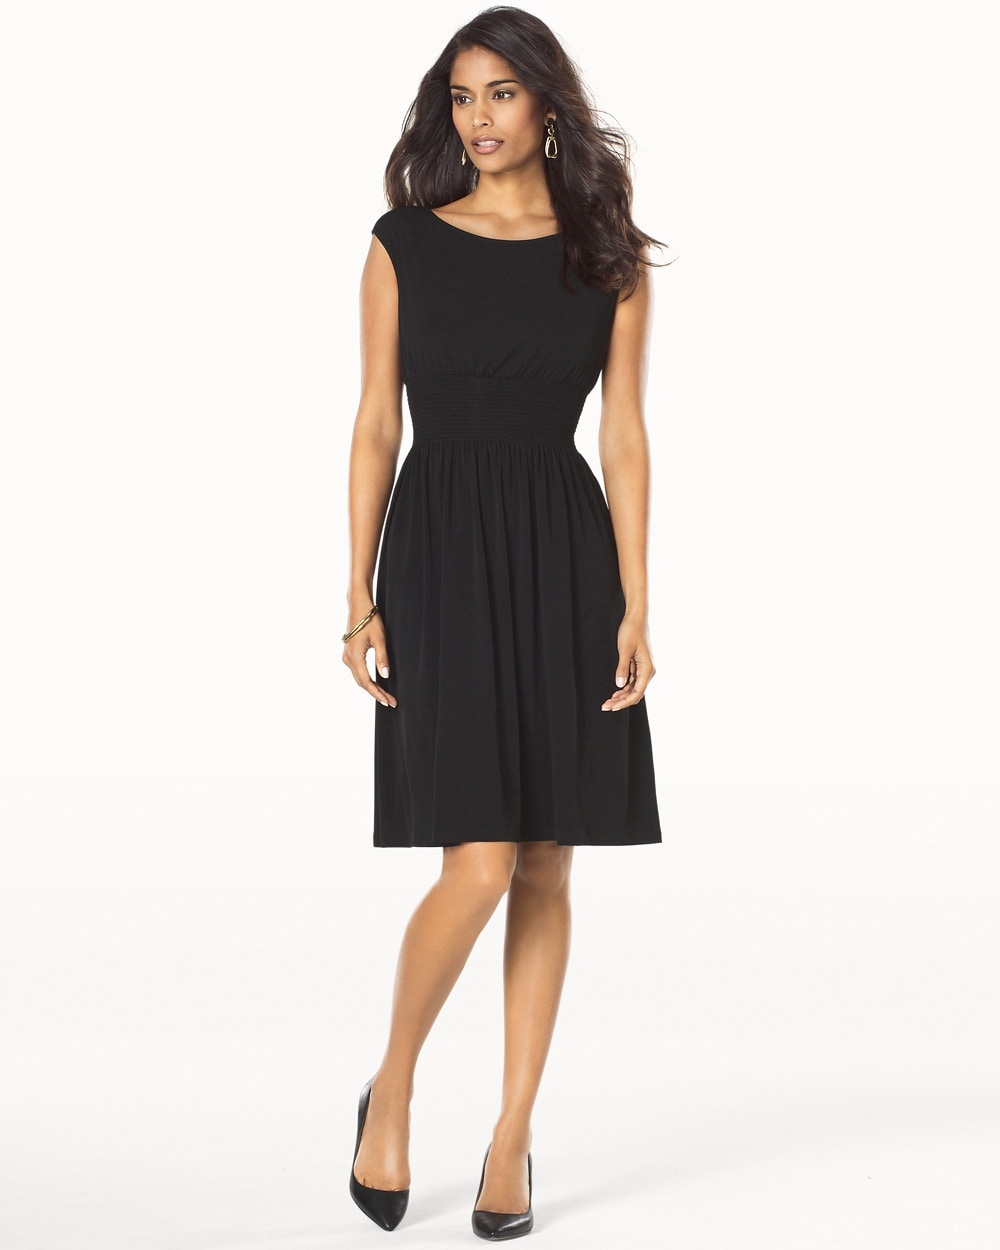 Muse Fit and Flare Black Dress